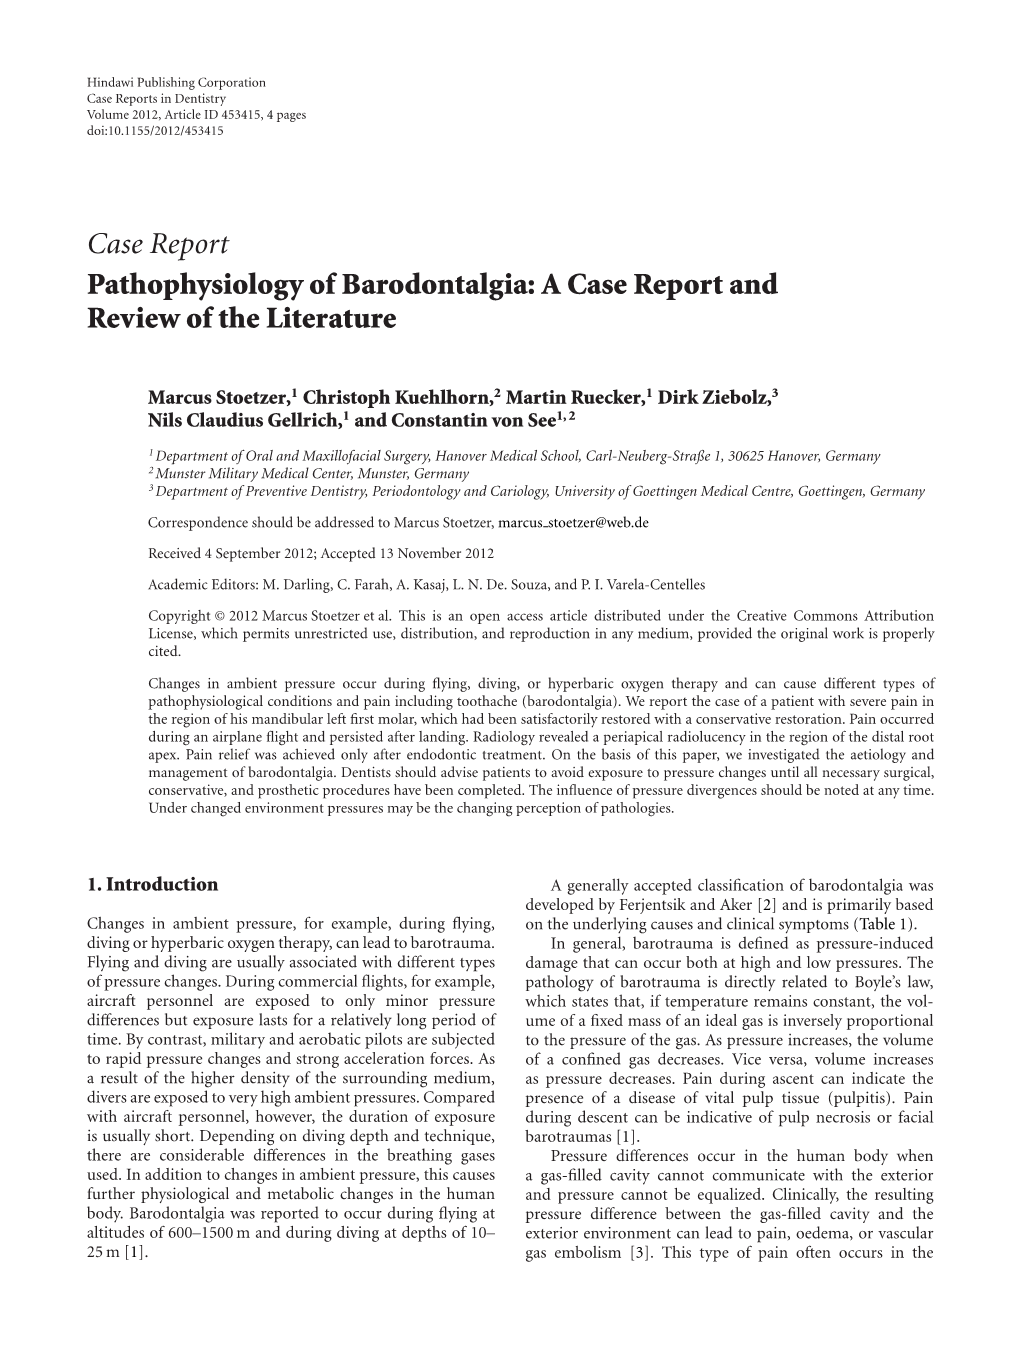 Case Report Pathophysiology of Barodontalgia: a Case Report and Review of the Literature